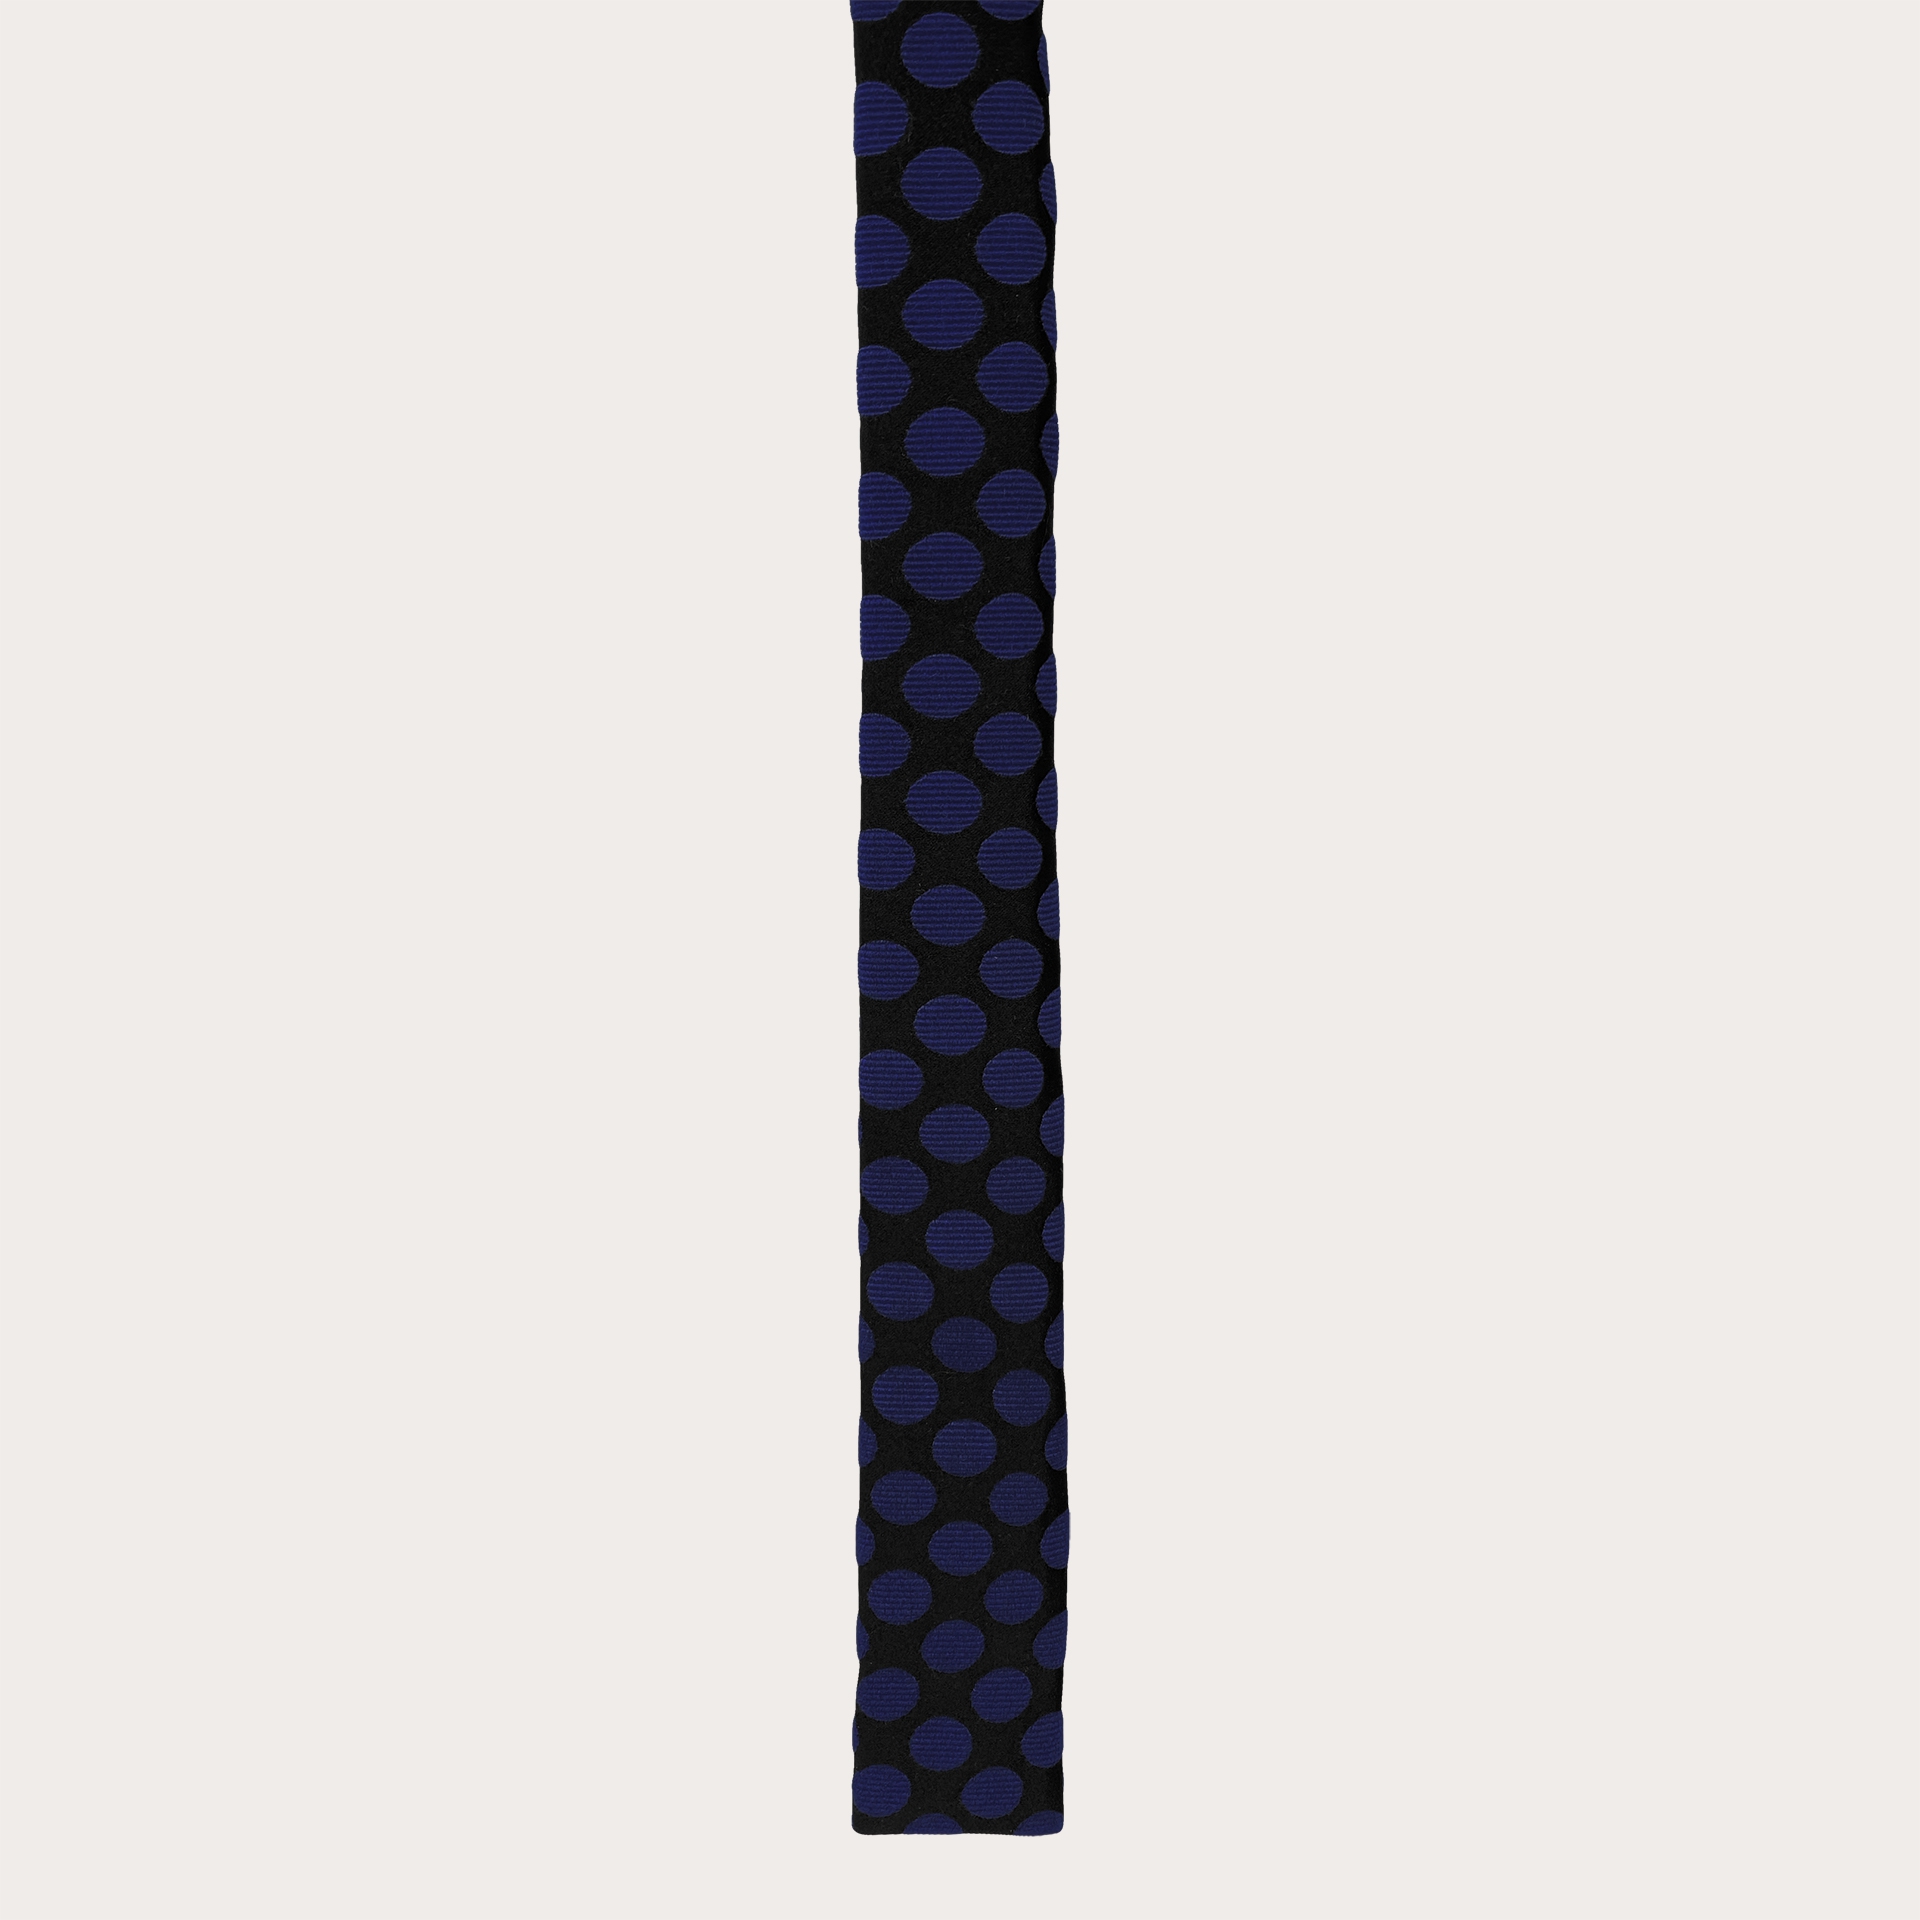 Narrow silk necktie with square end, black with blue polka dots